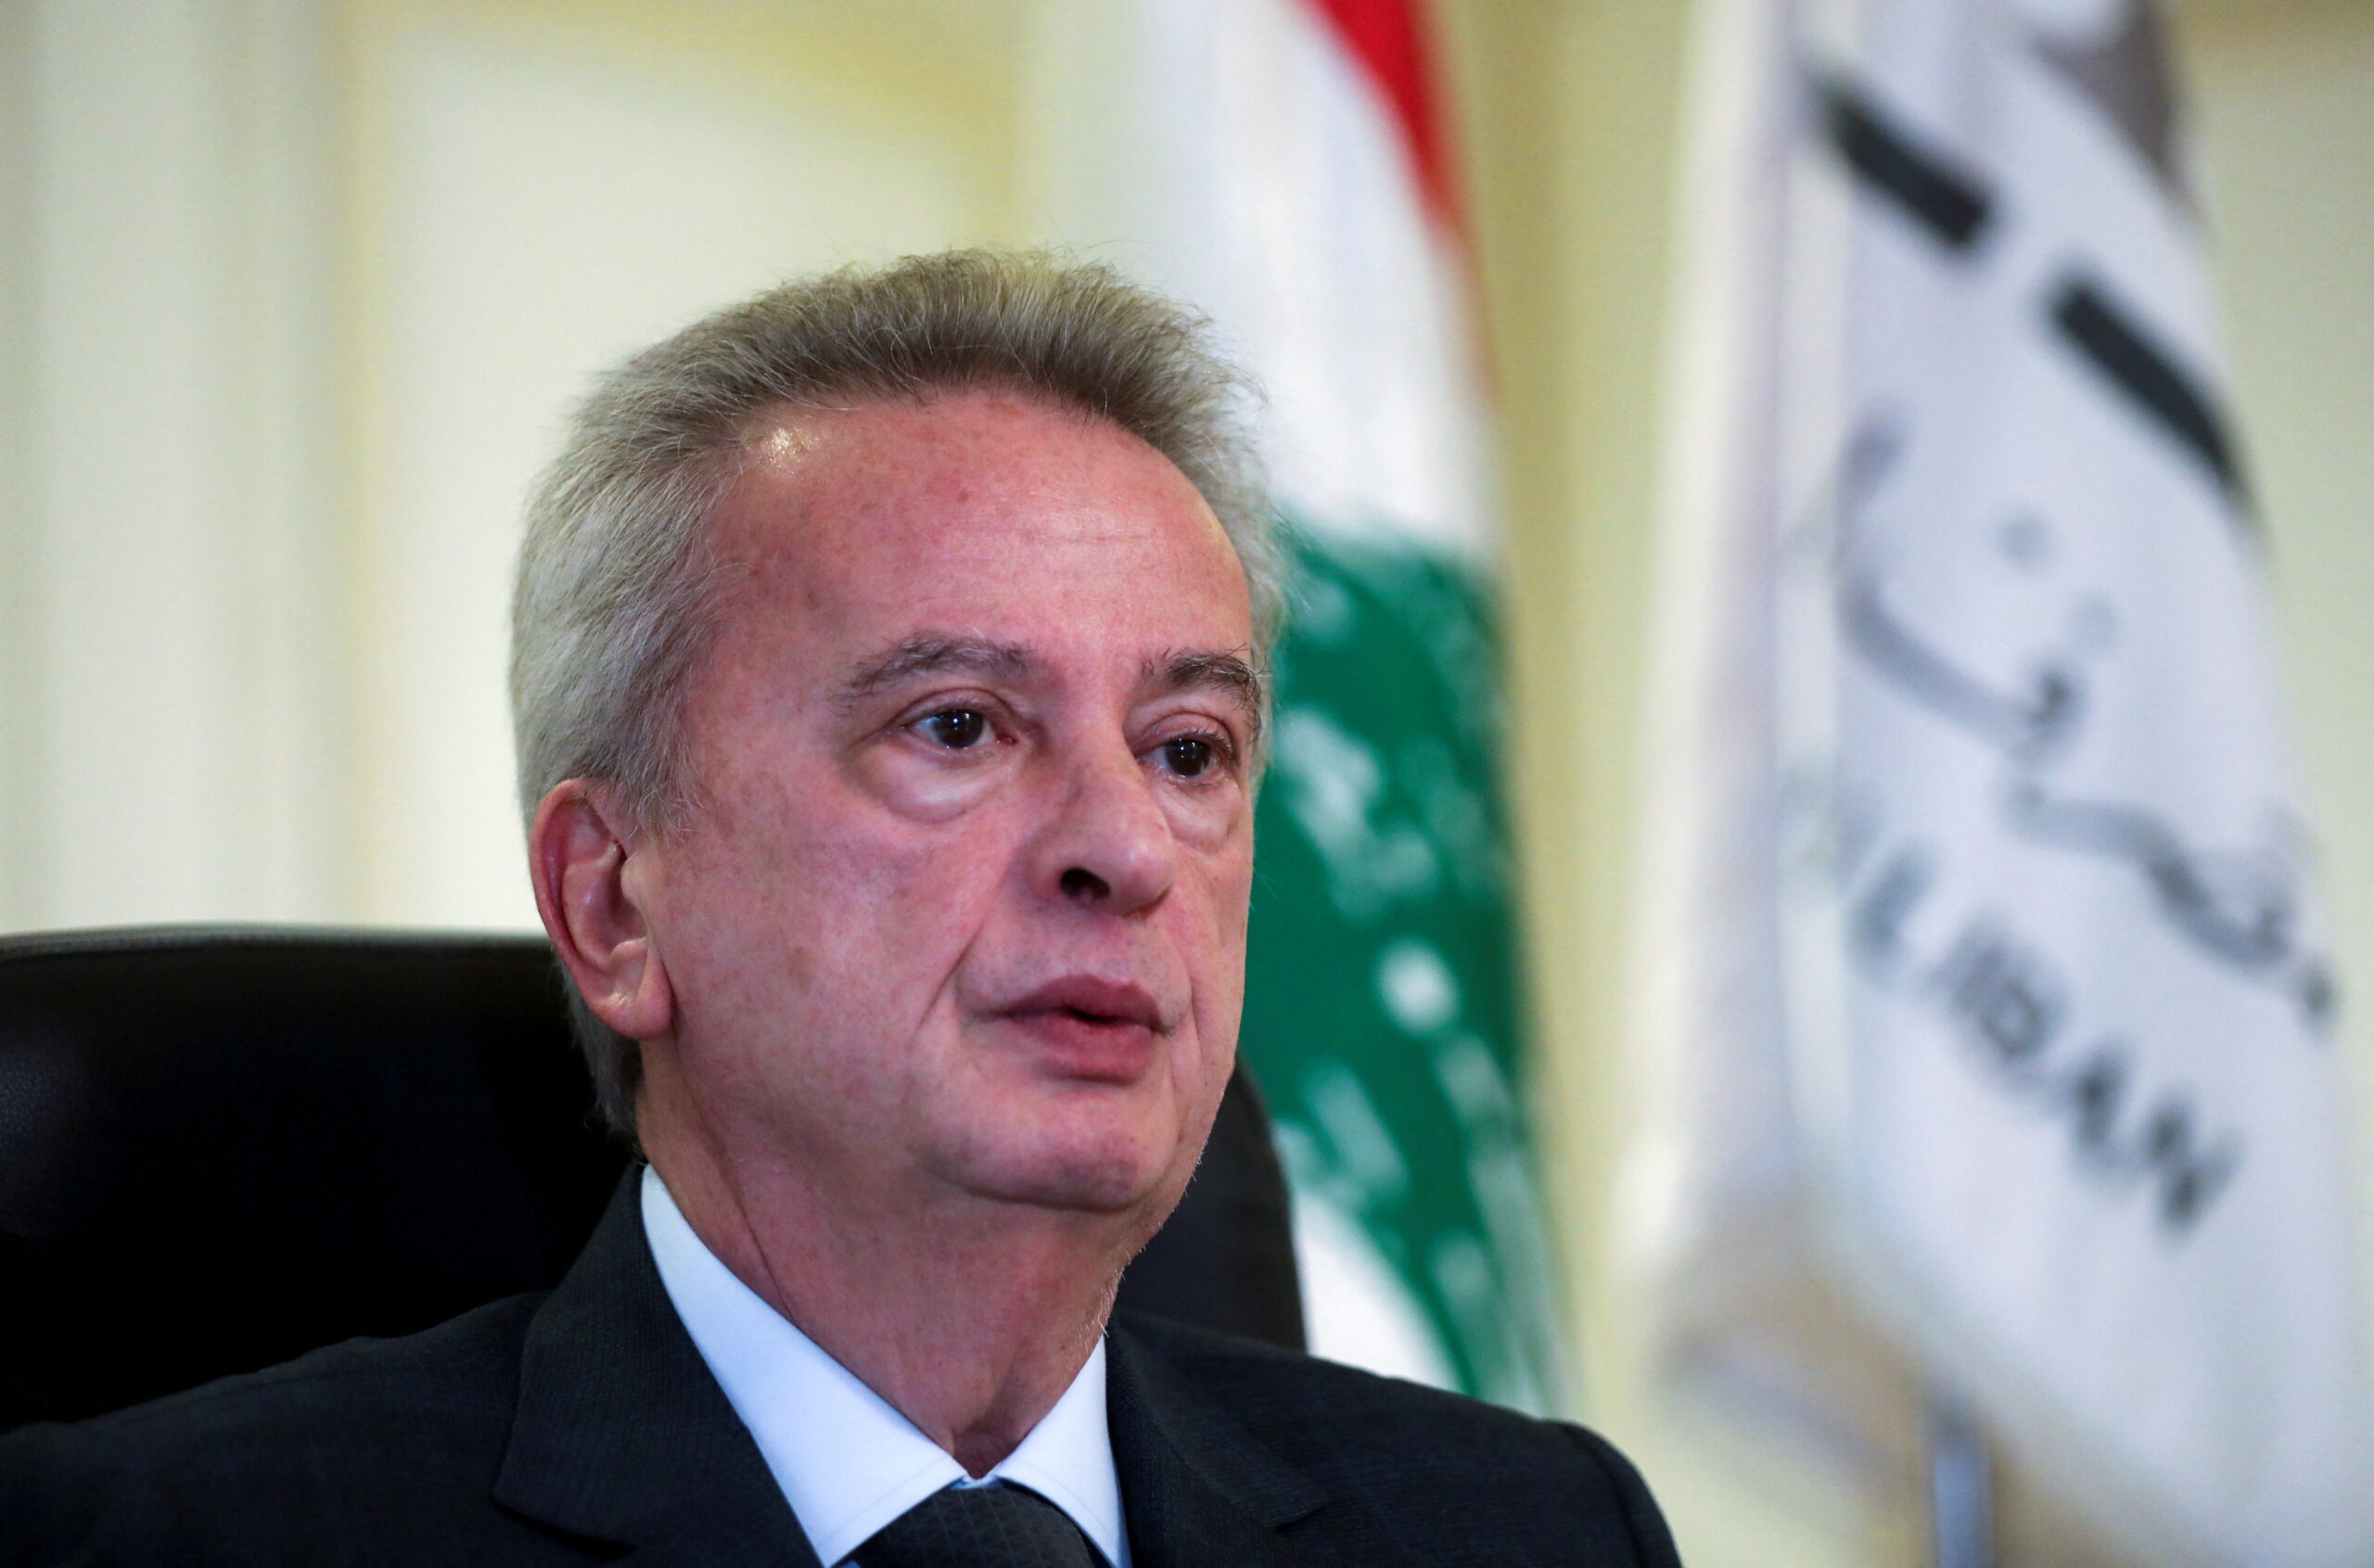 FILE PHOTO: Lebanon’s Central Bank Governor Riad Salameh speaks during an interview in Beirut